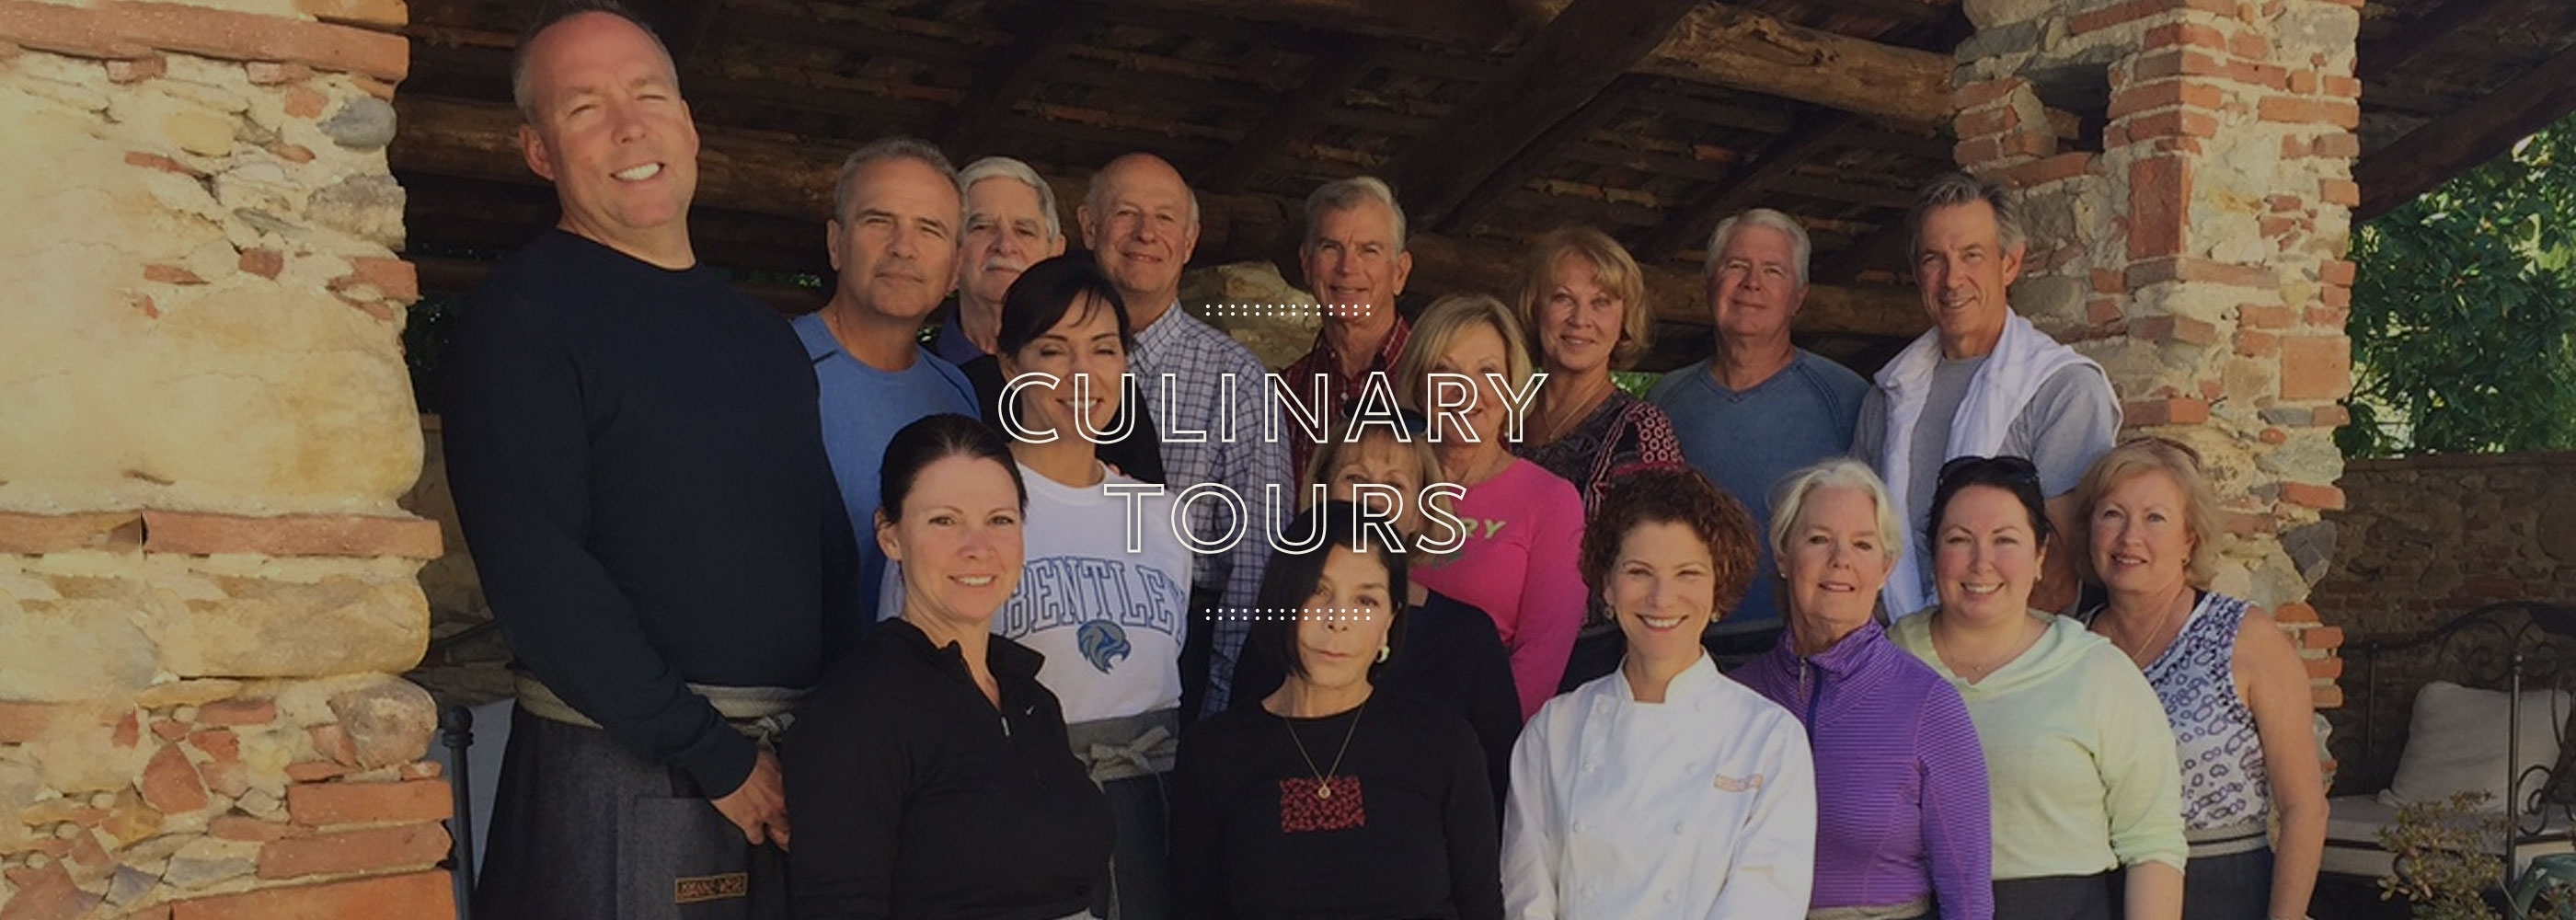 Culinary Tour Cooking Class Group